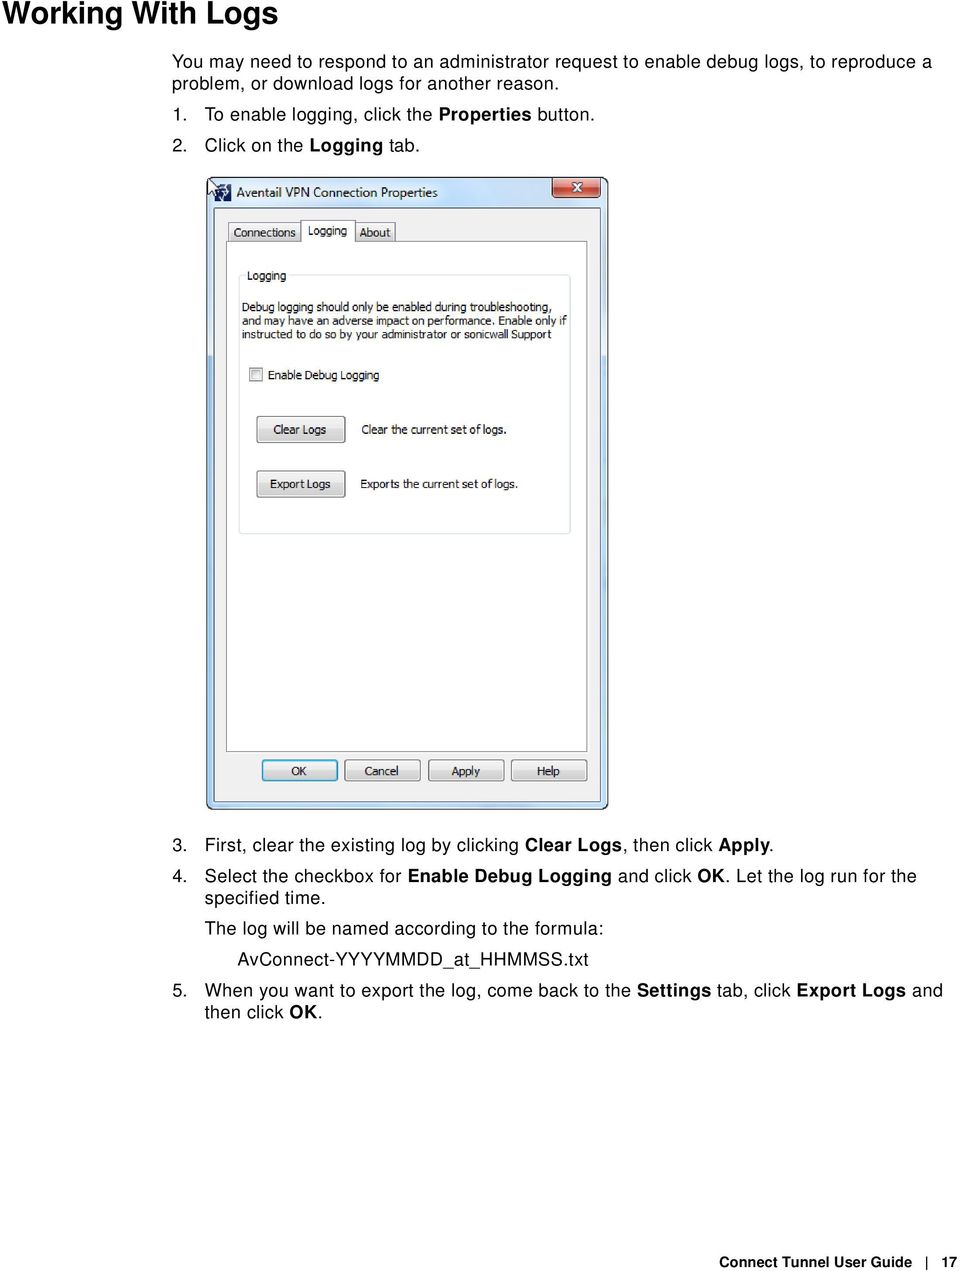 Select the checkbox for Enable Debug Logging and click OK. Let the log run for the specified time.